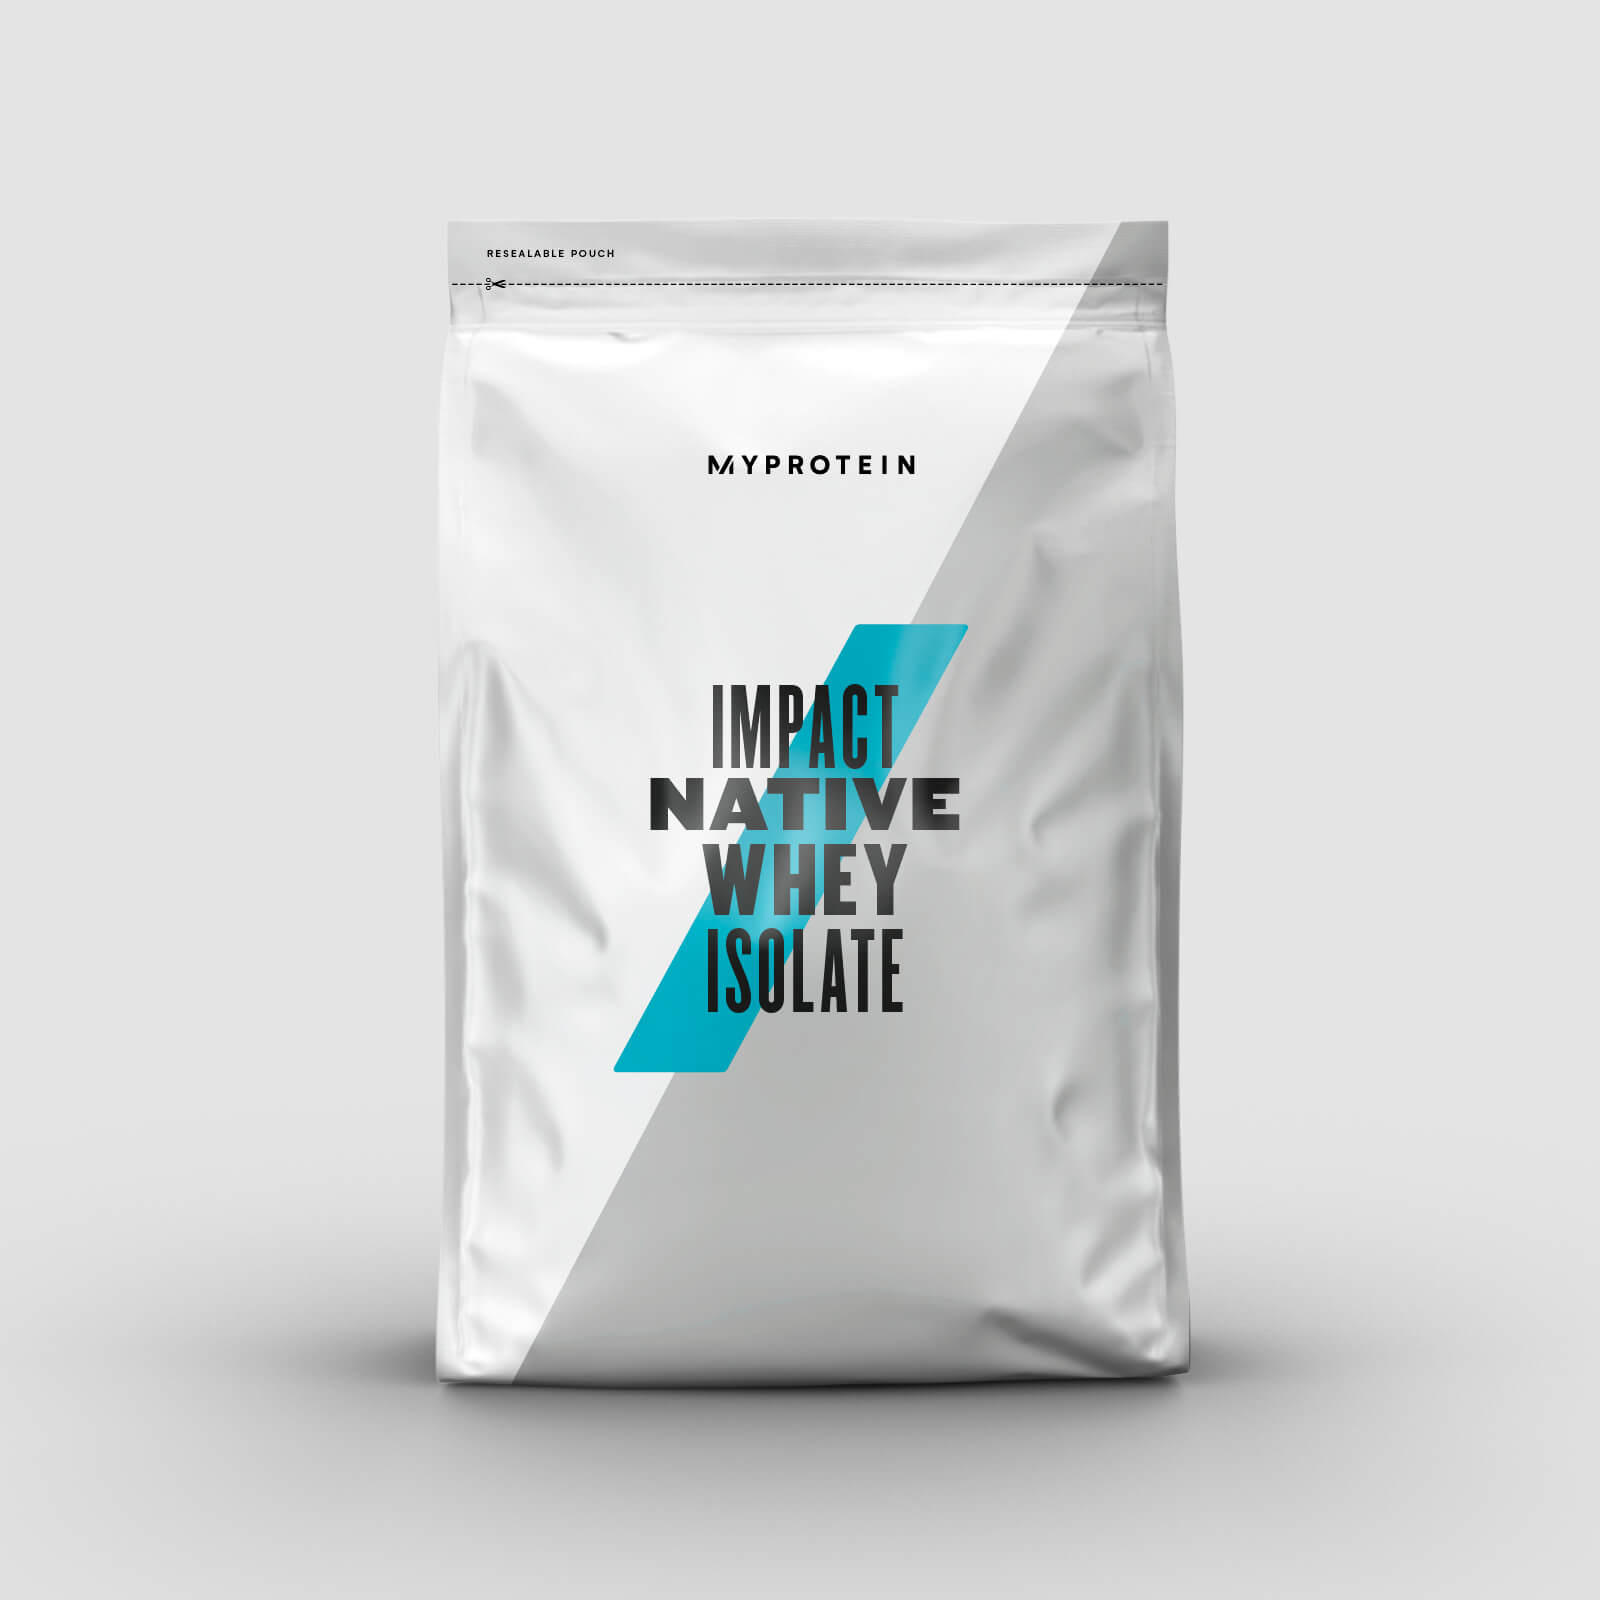 Myprotein Impact Native Whey Isolate - 1kg - New - Natural Chocolate